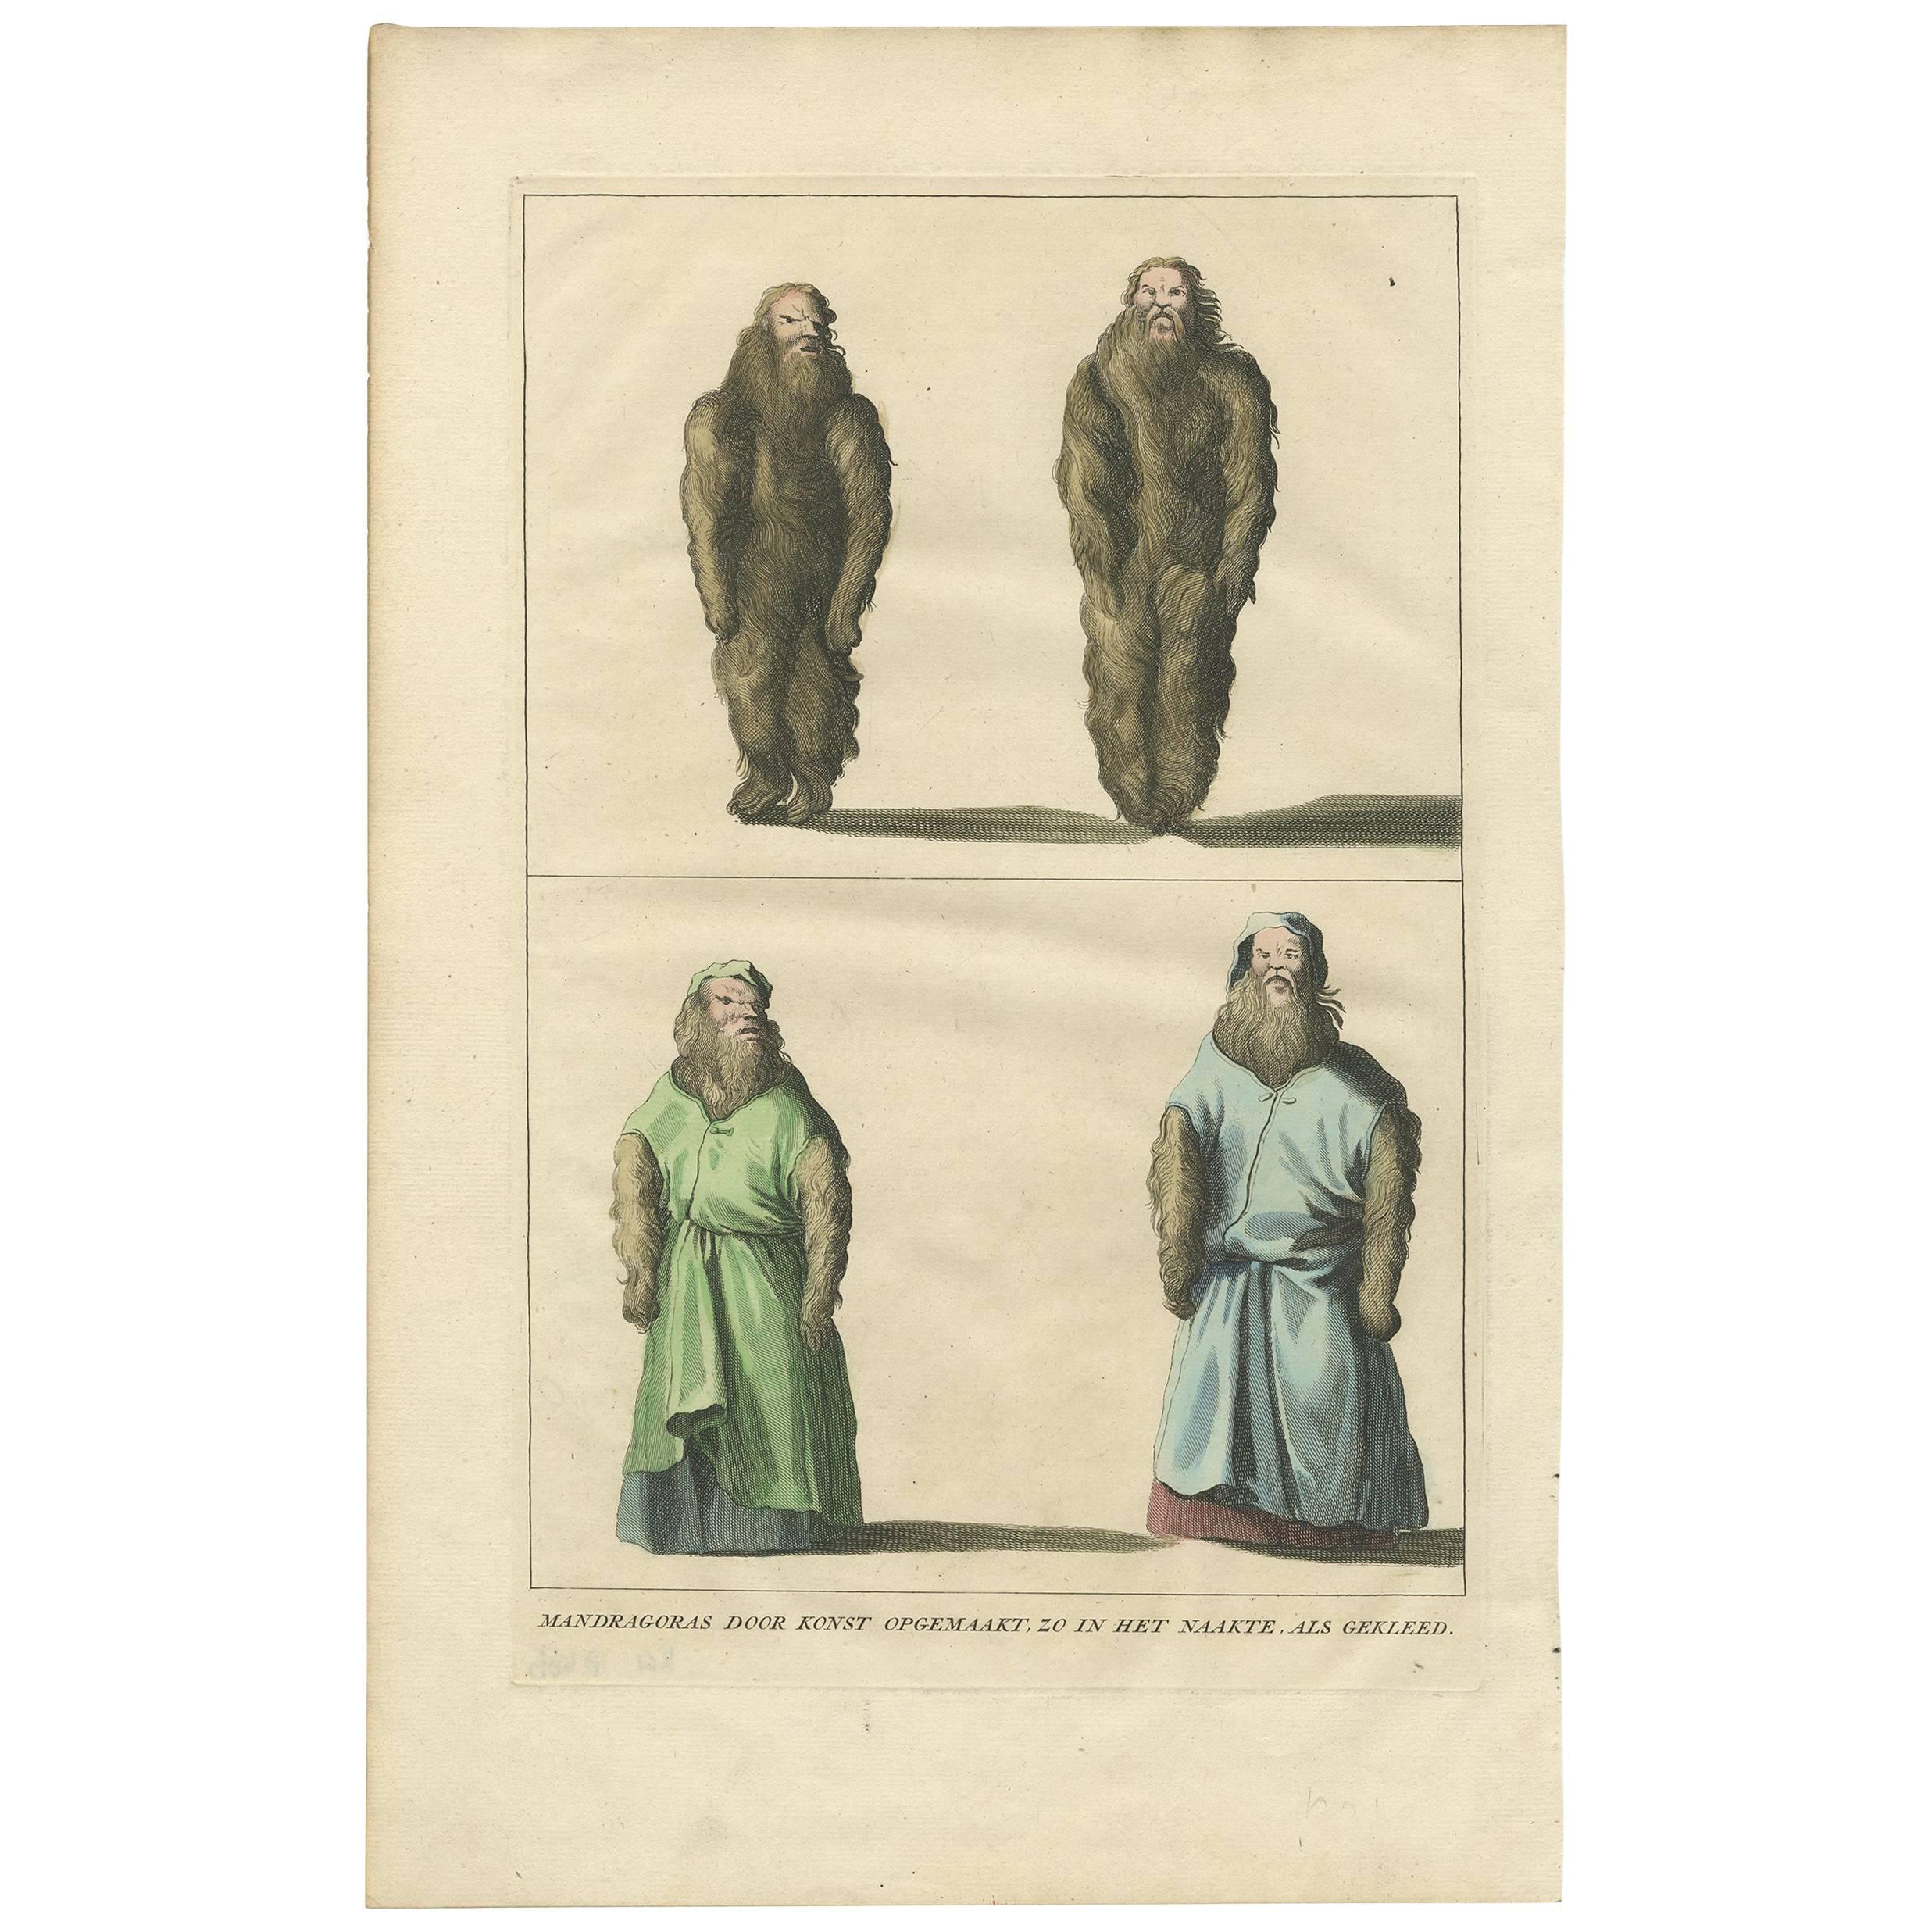 Antique Print of Mandragores ‘Mandrakes, Naked and Clothed’ by A. Calmet